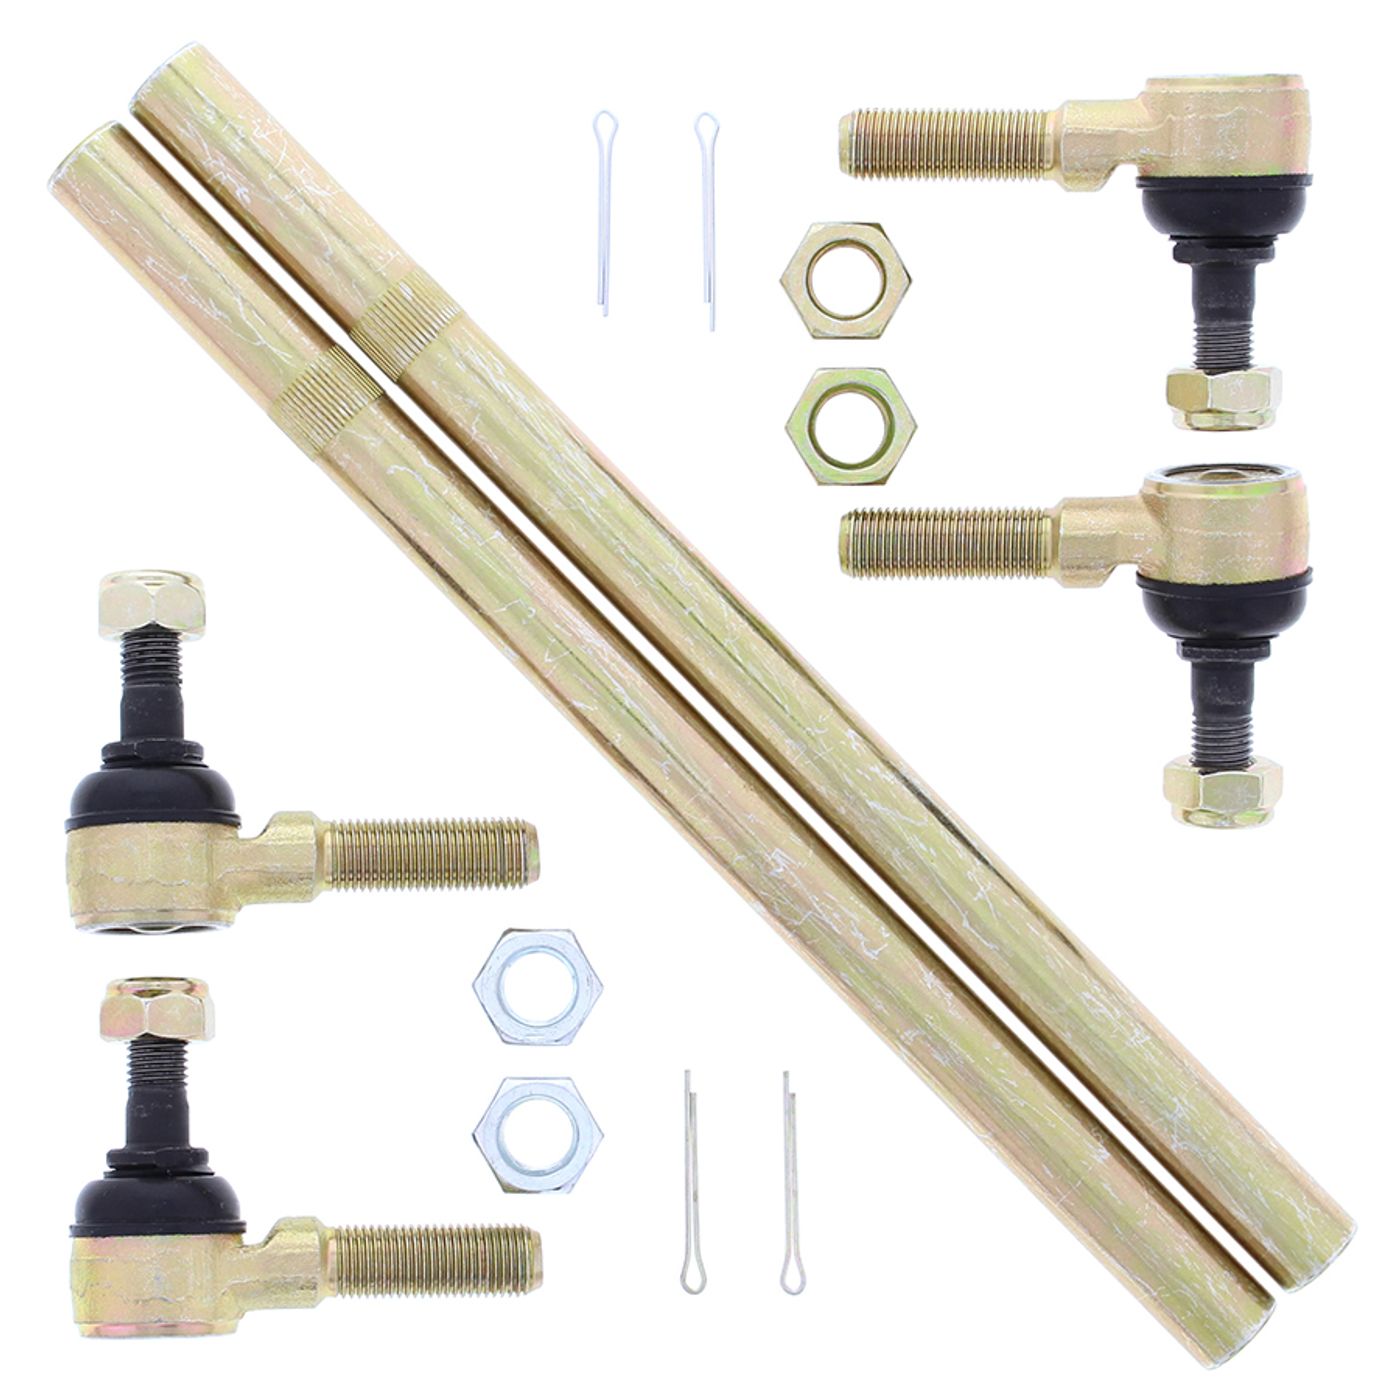 Wrp Tie Rod Kits - WRP521019 image